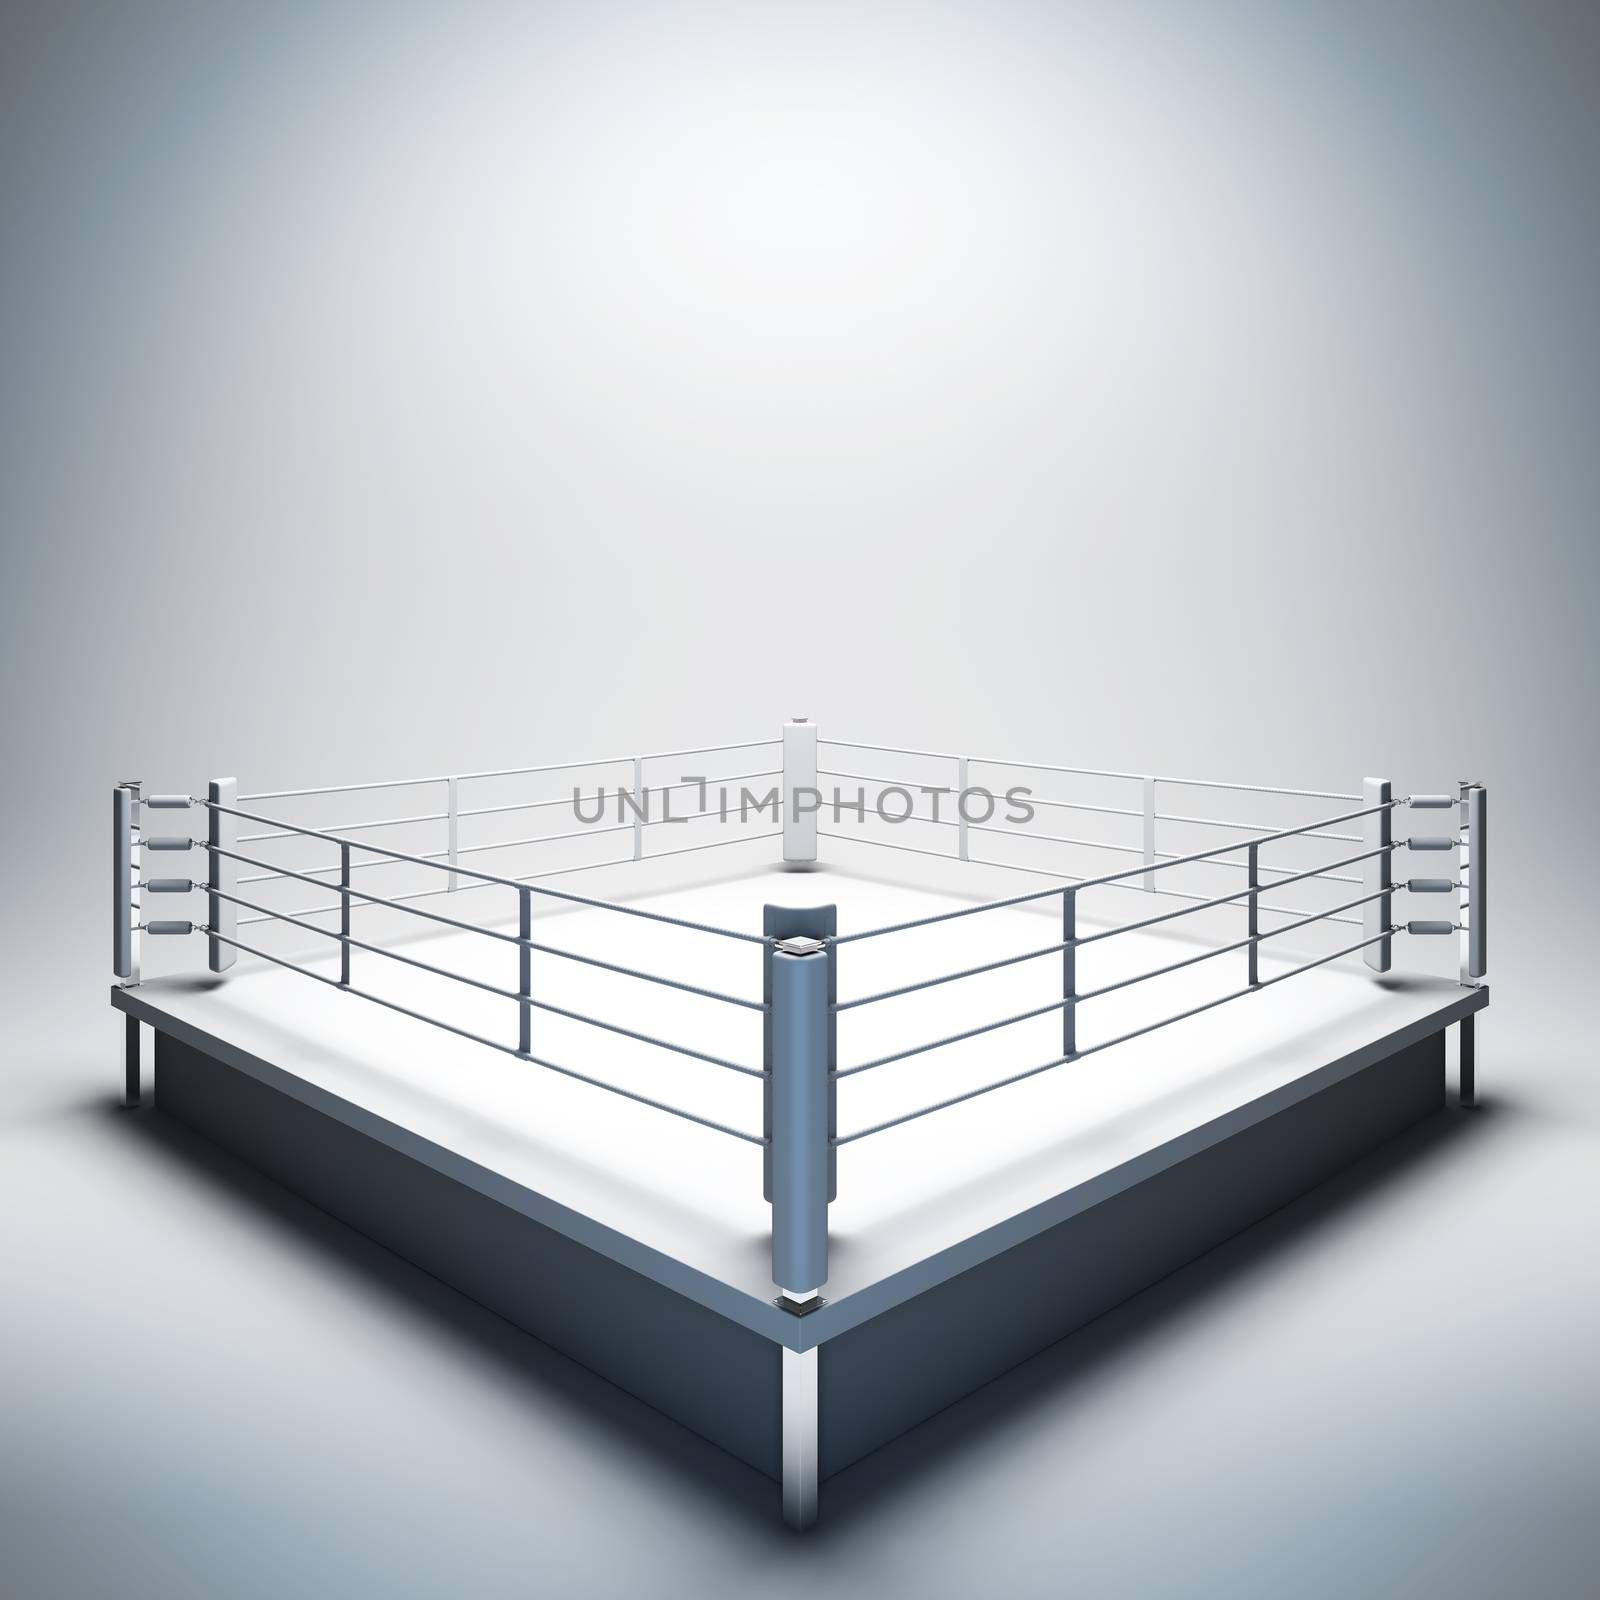 3d render illustration blank template layout of empty white boxing ring. Empty copy space to place your text, object, logo or photo boxers.